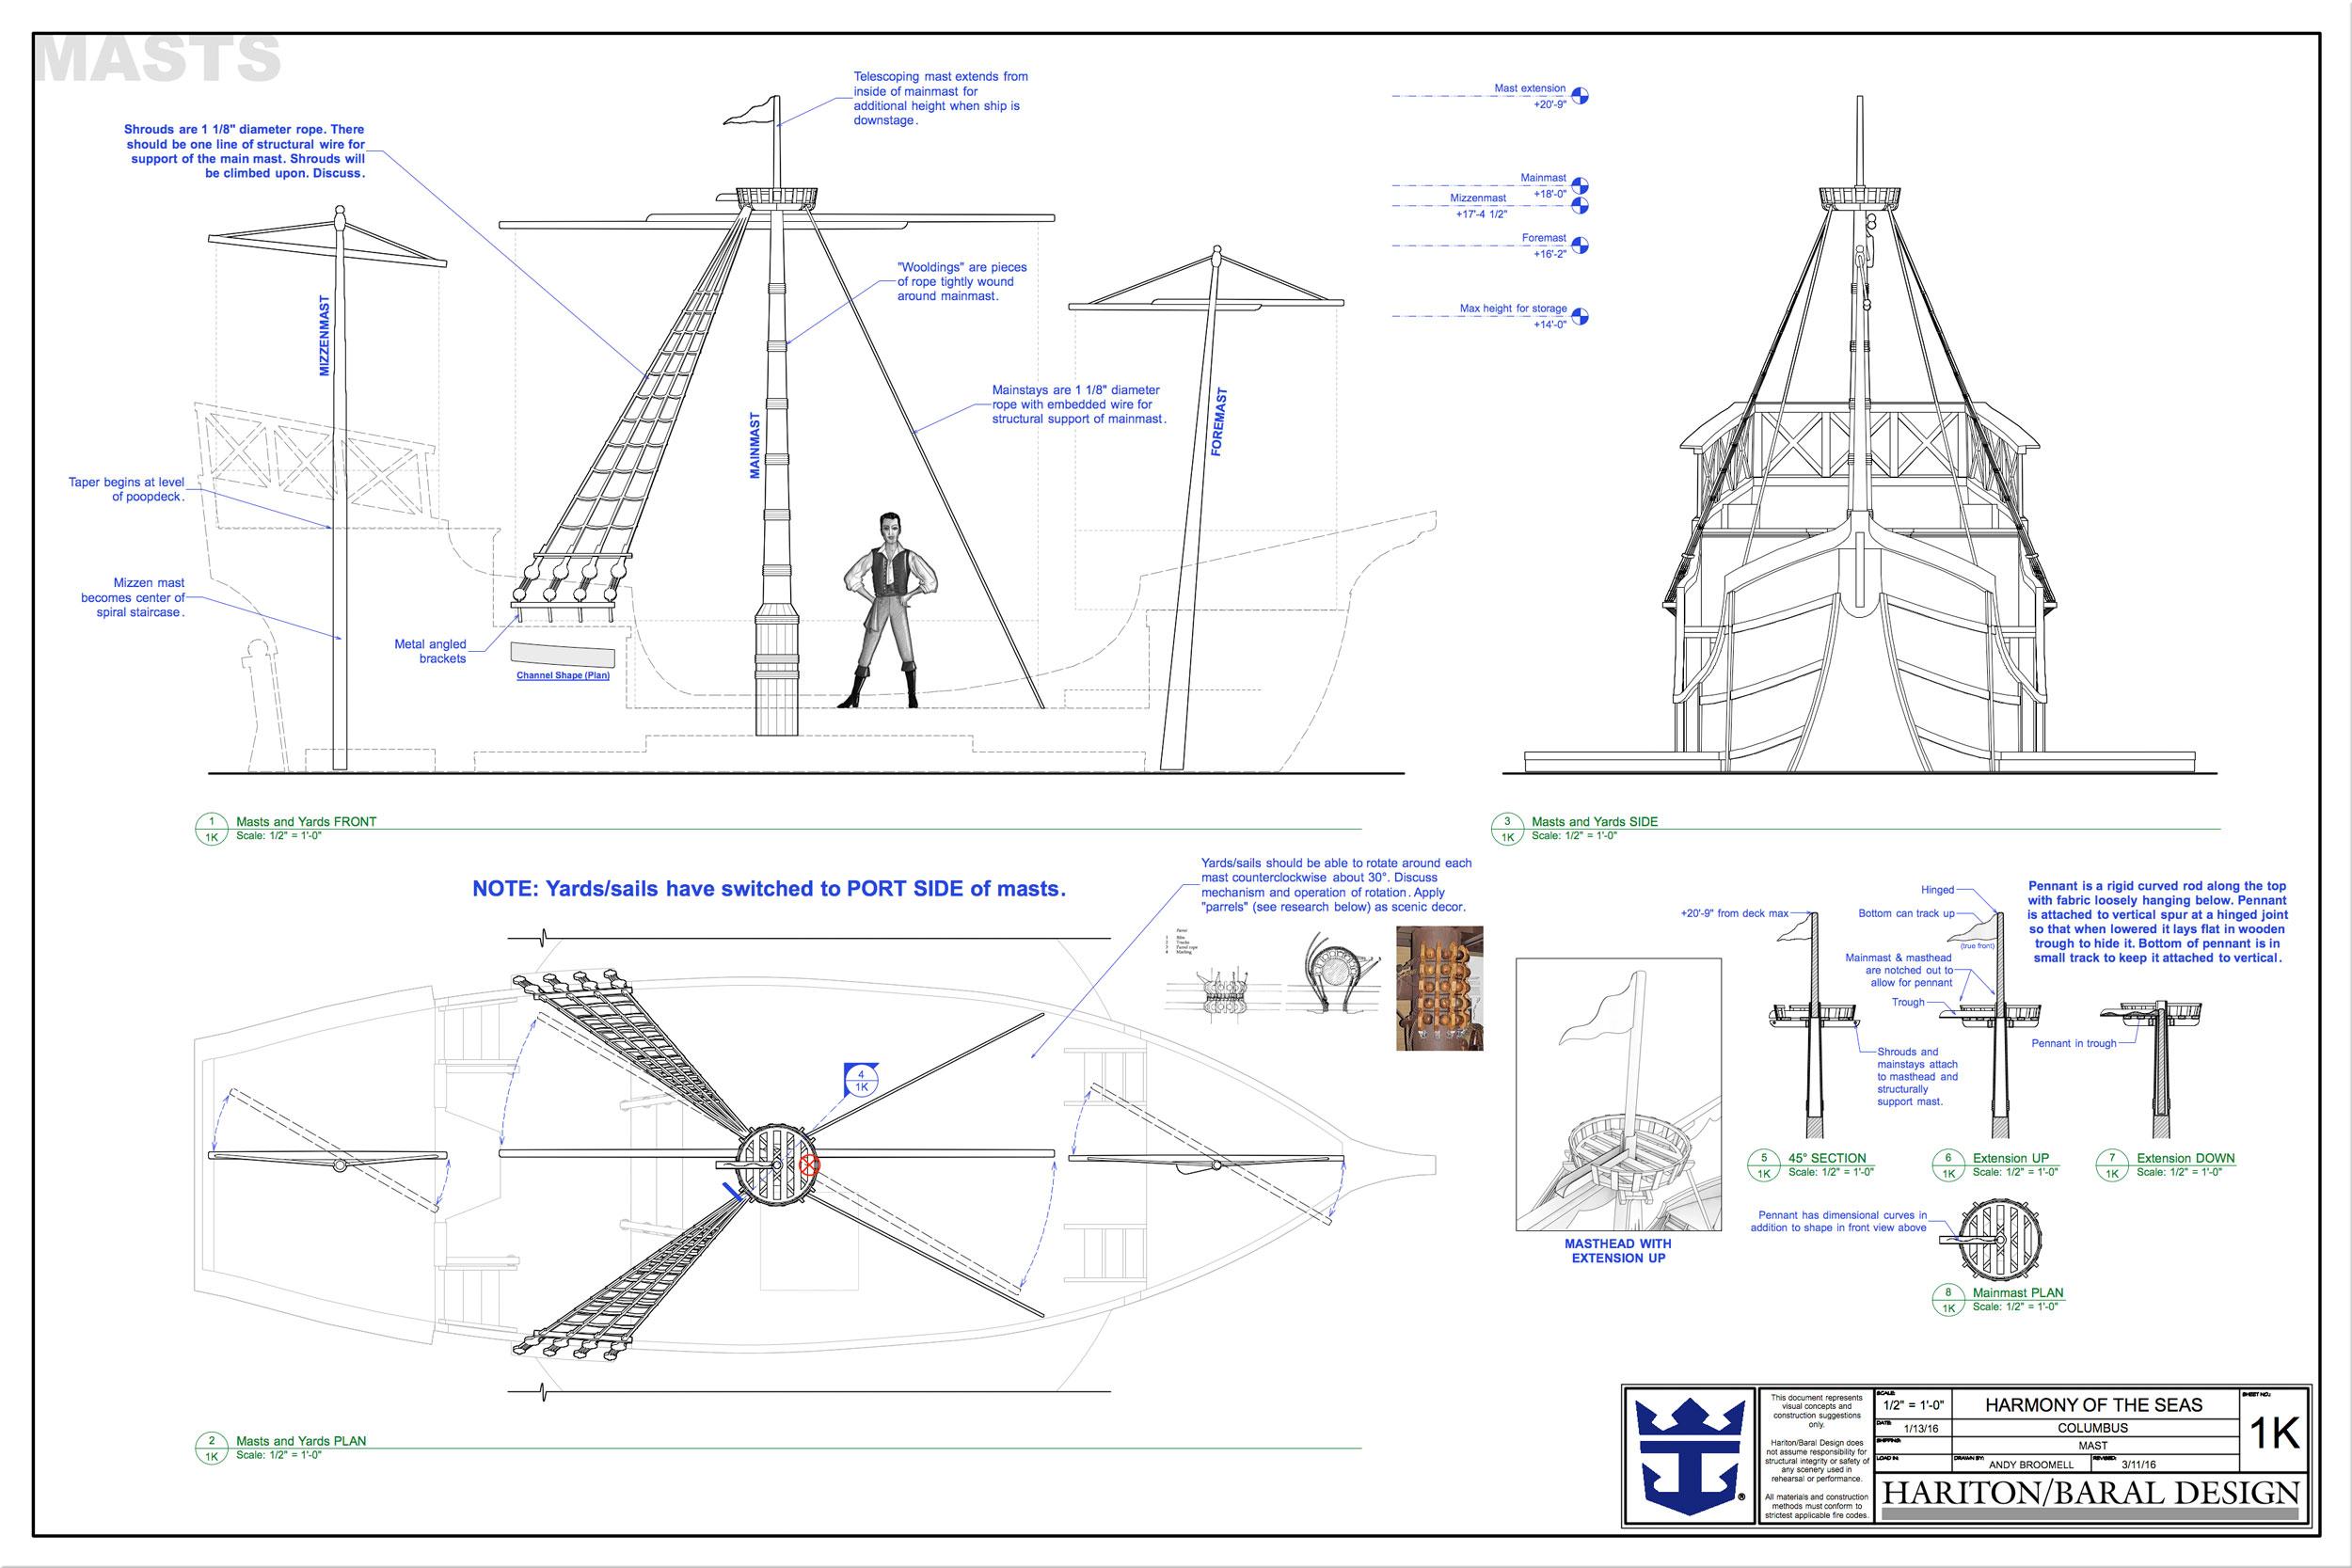 andy-broomell-drafting-columbus10-musical-vectorworks-scenic-design-scenery-plans-sailing-ship.jpg